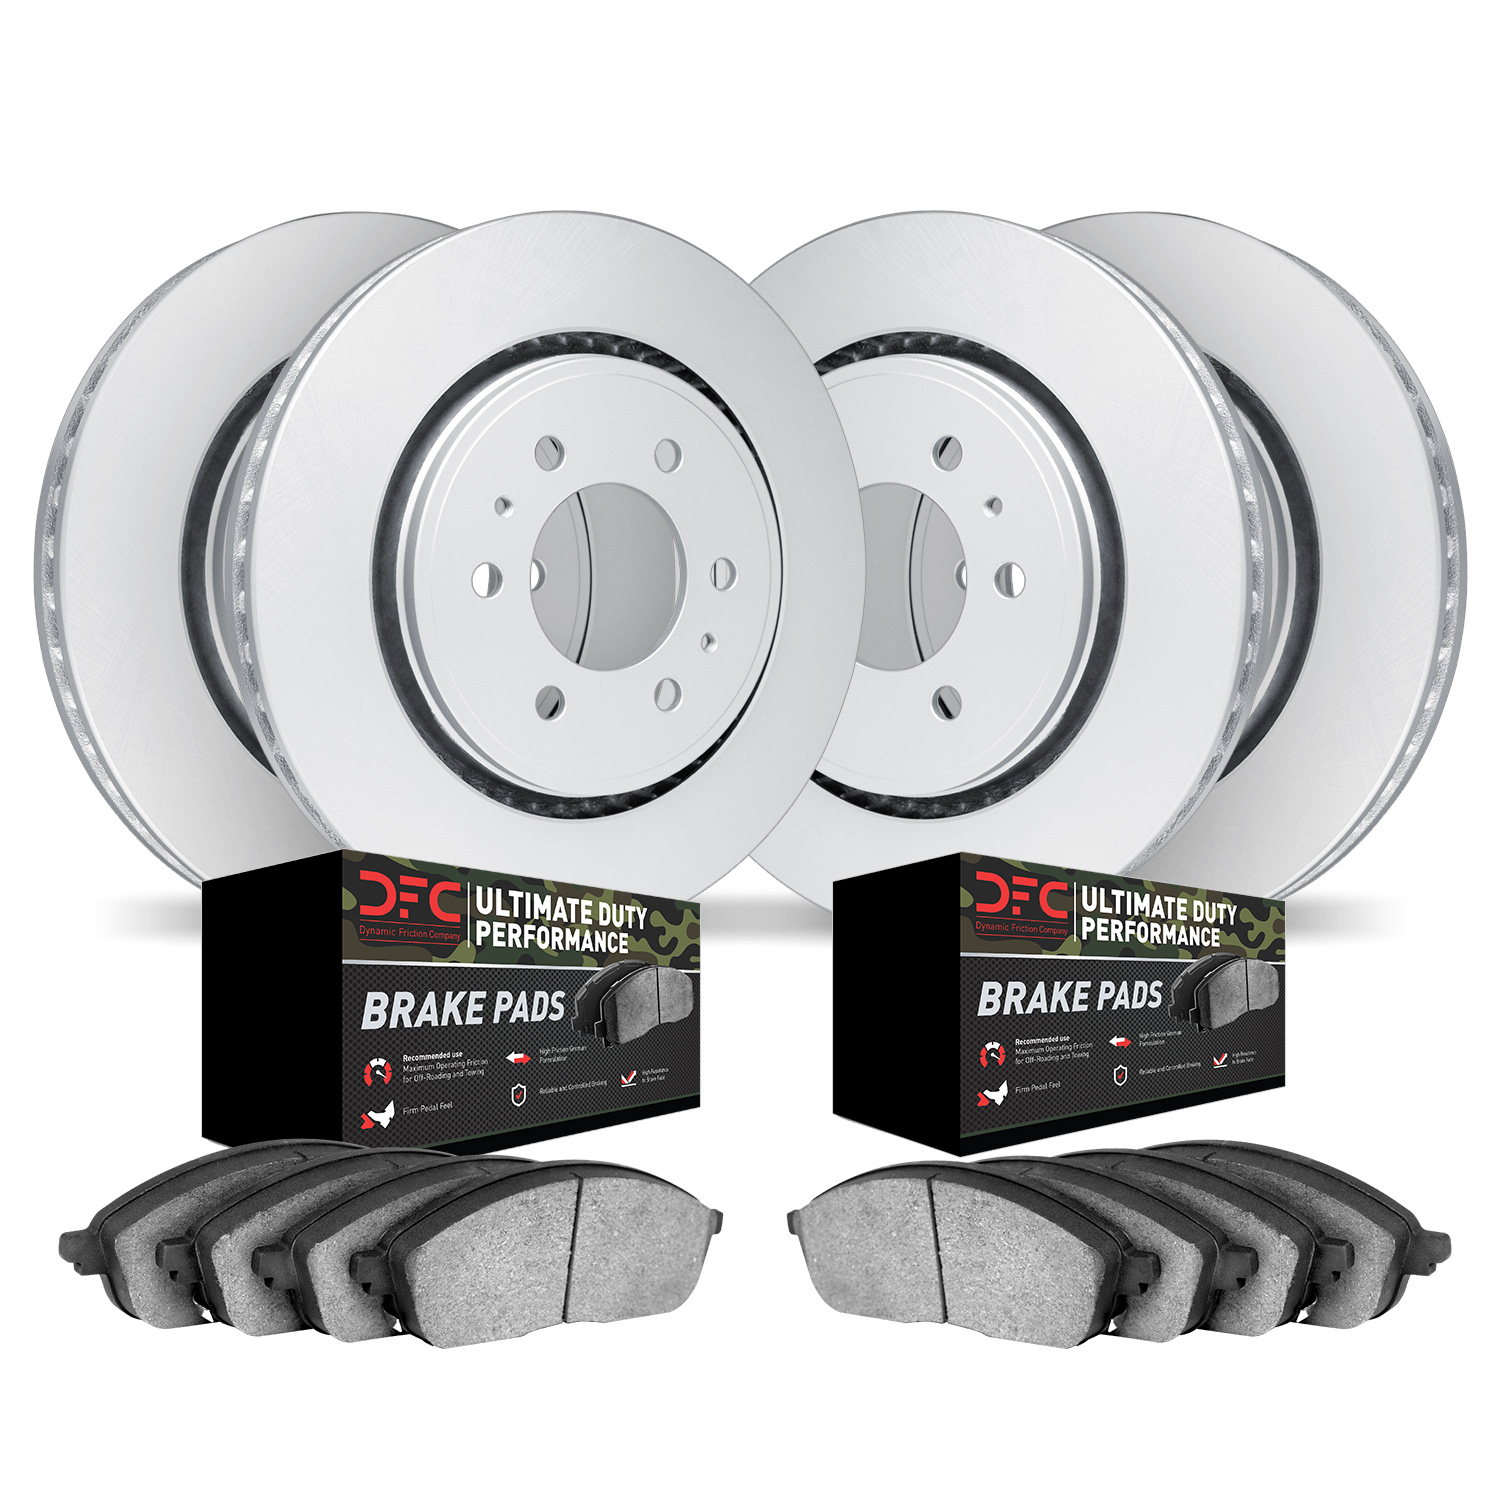 4404-76004 Geospec Brake Rotors with Ultimate-Duty Brake Pads Kit, 2003-2009 Lexus/Toyota/Scion, Position: Front and Rear